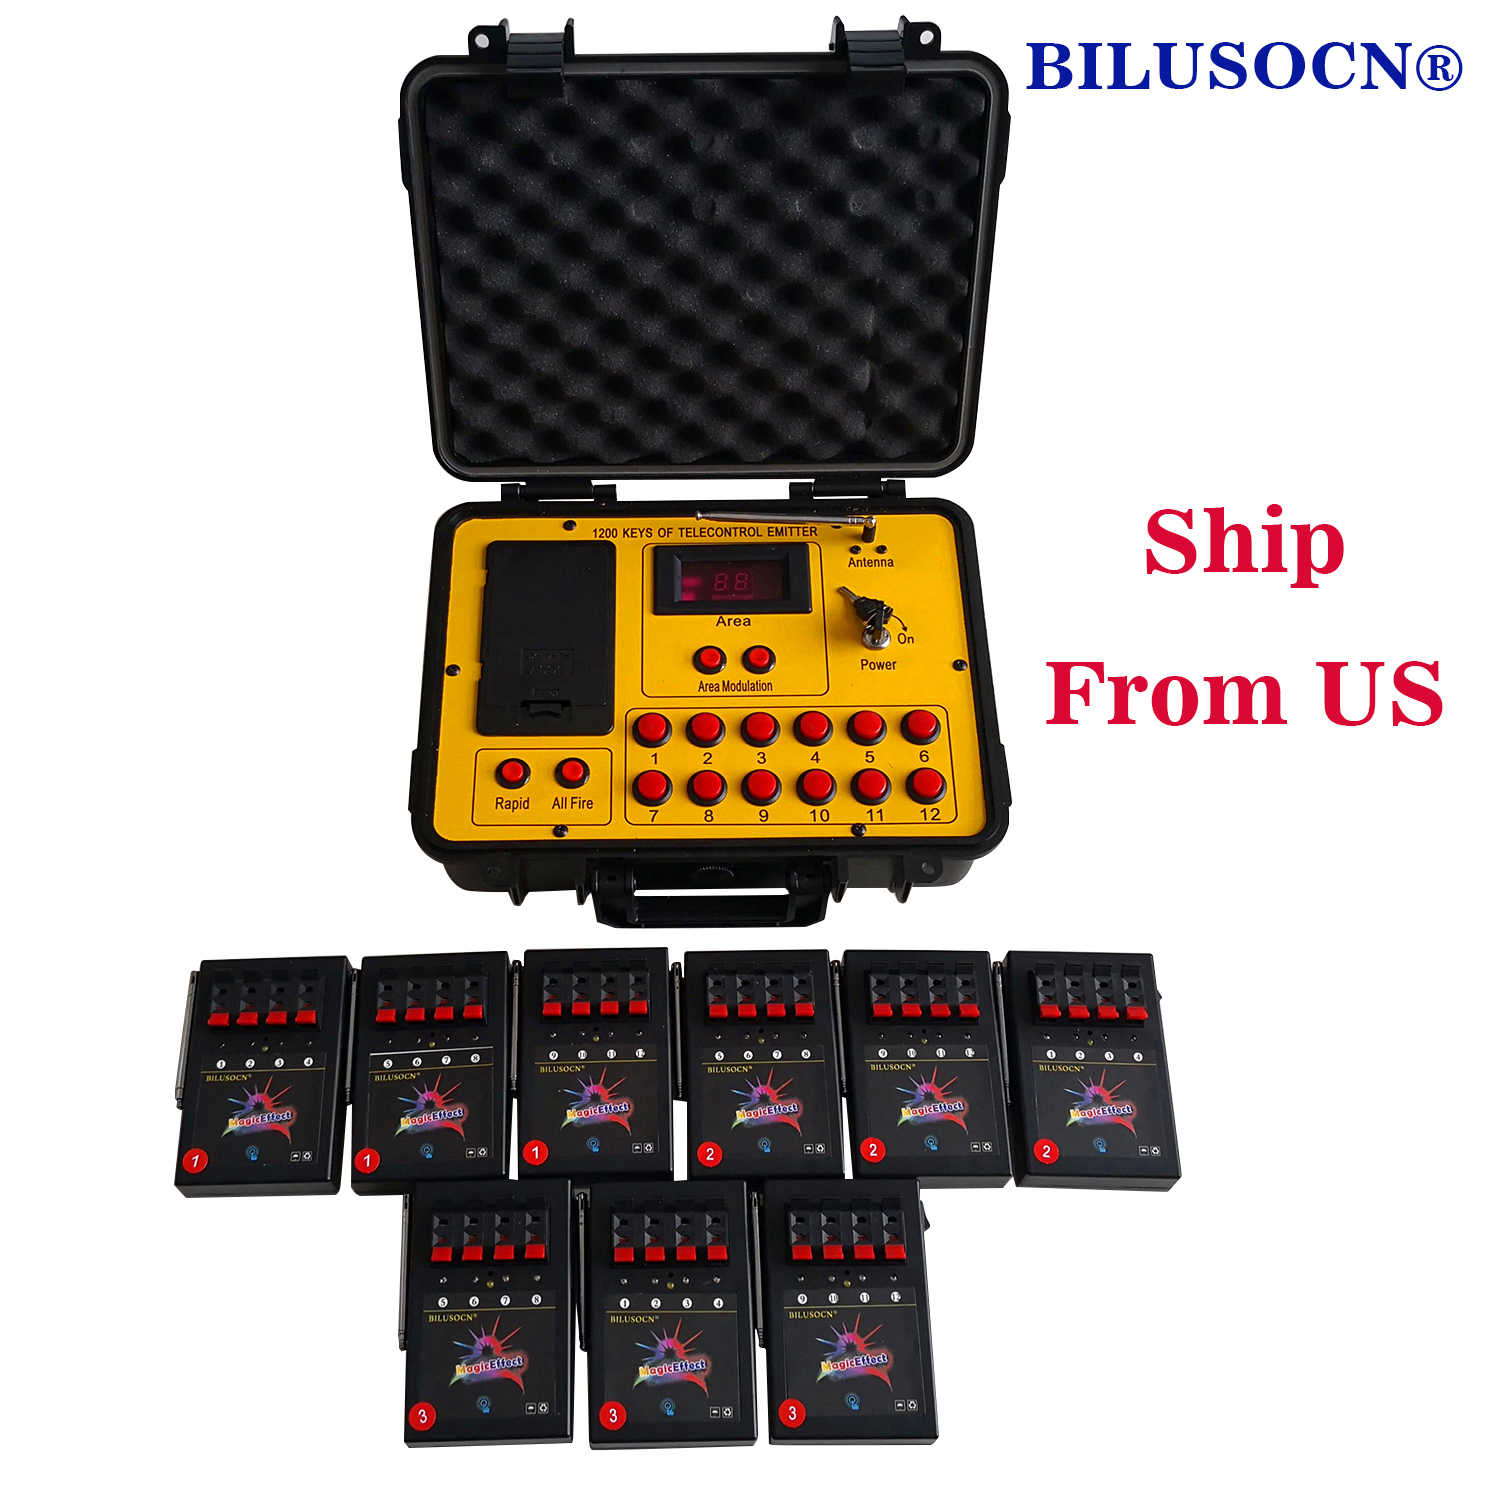 Shipping From USA Bilusocn 500M distance+36 Cues Fireworks Firing System ABS Waterproof Case remote Control Equipment